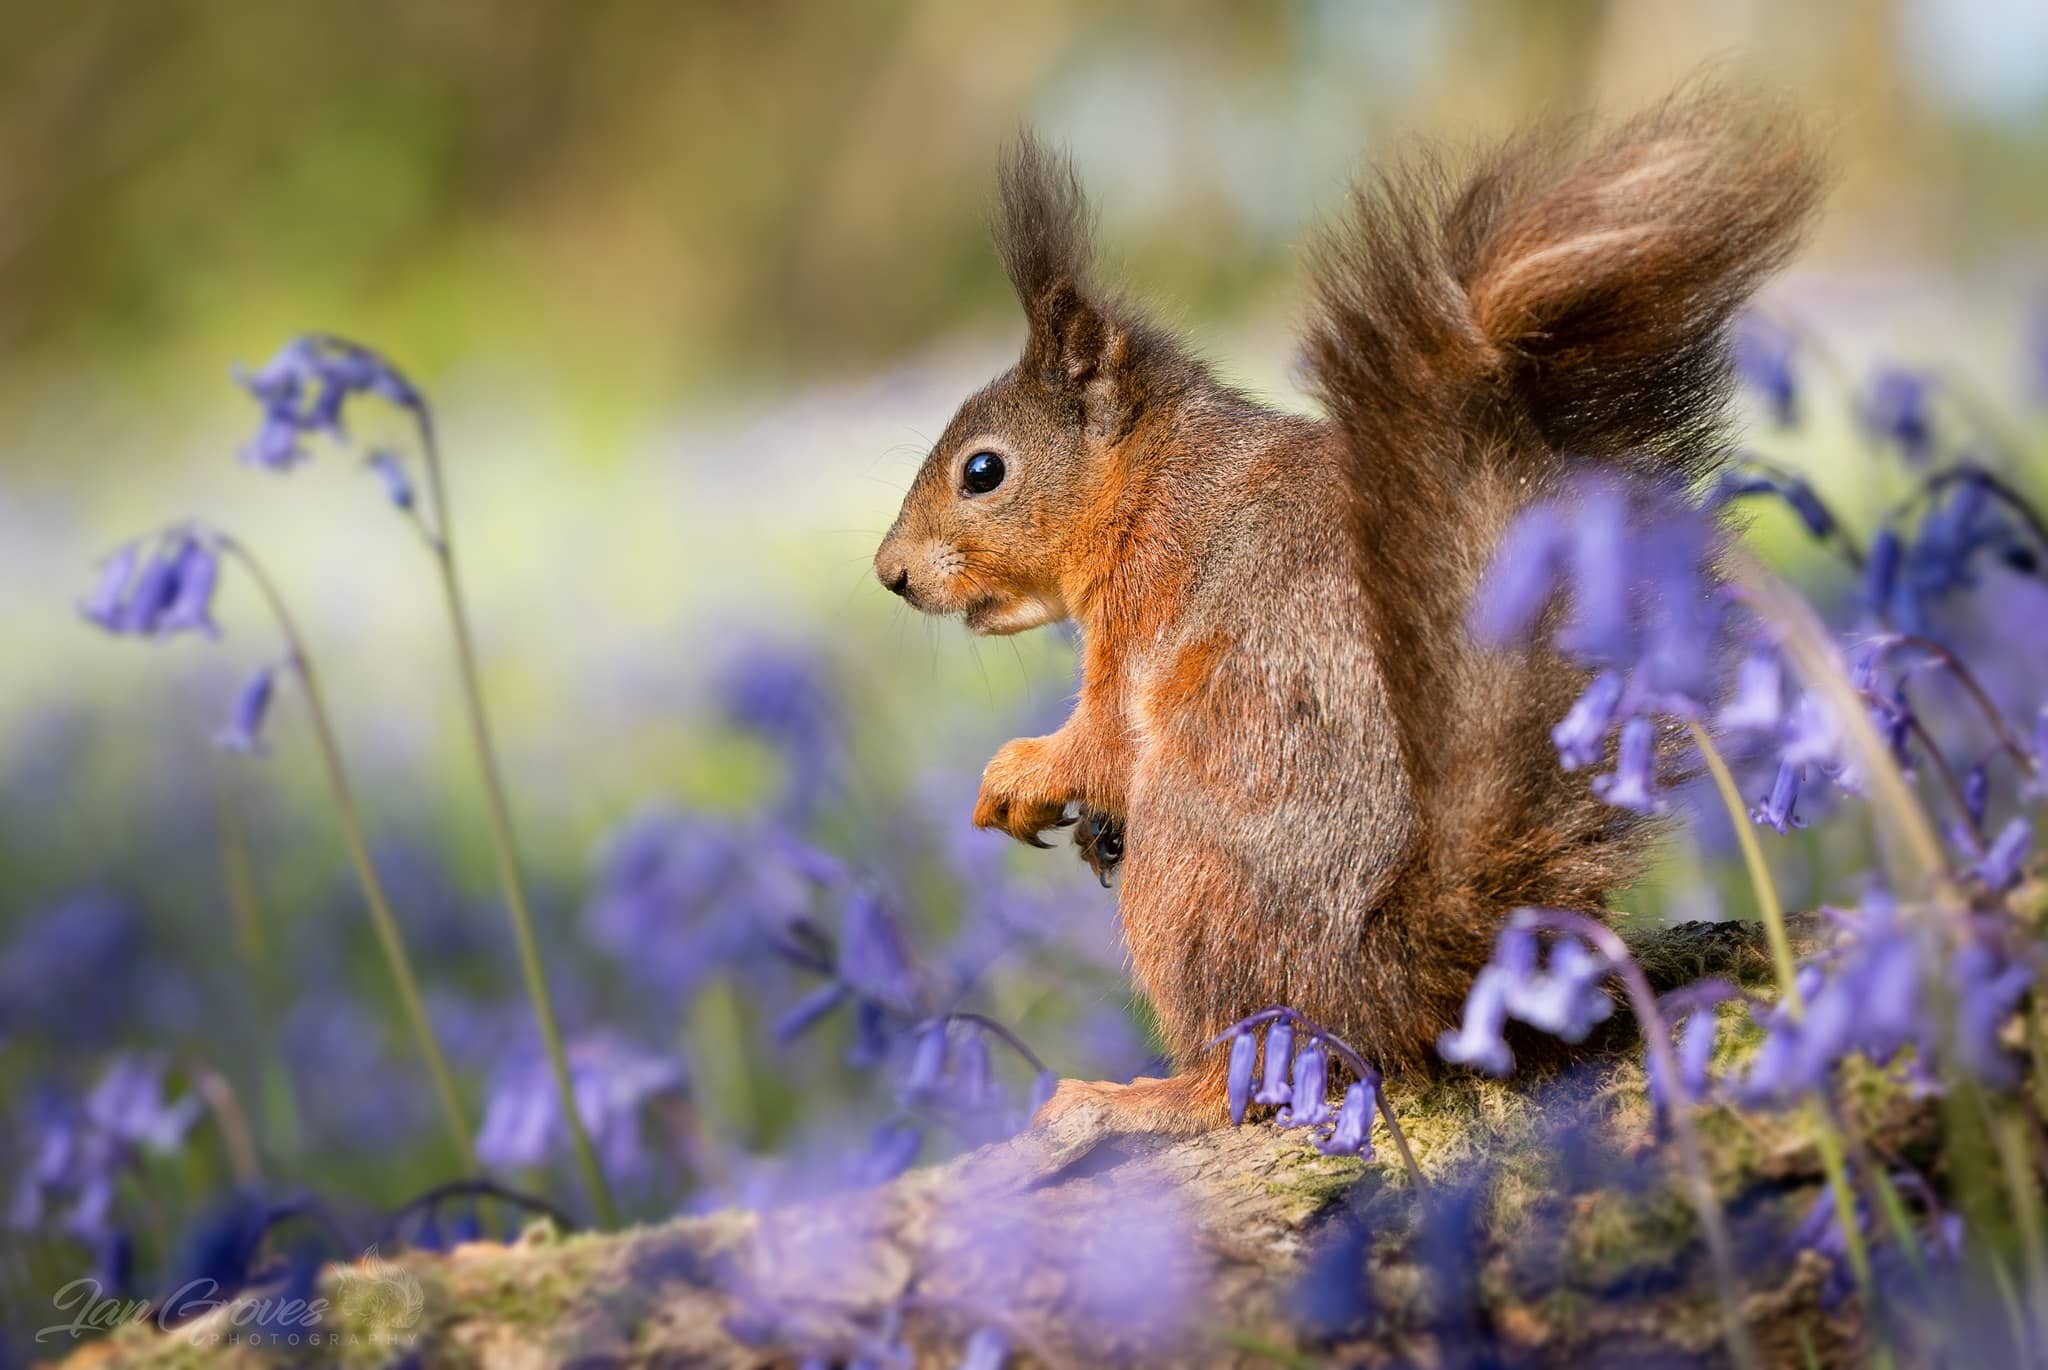 Red squirrel in harmony with Bluebells by Ian Groves